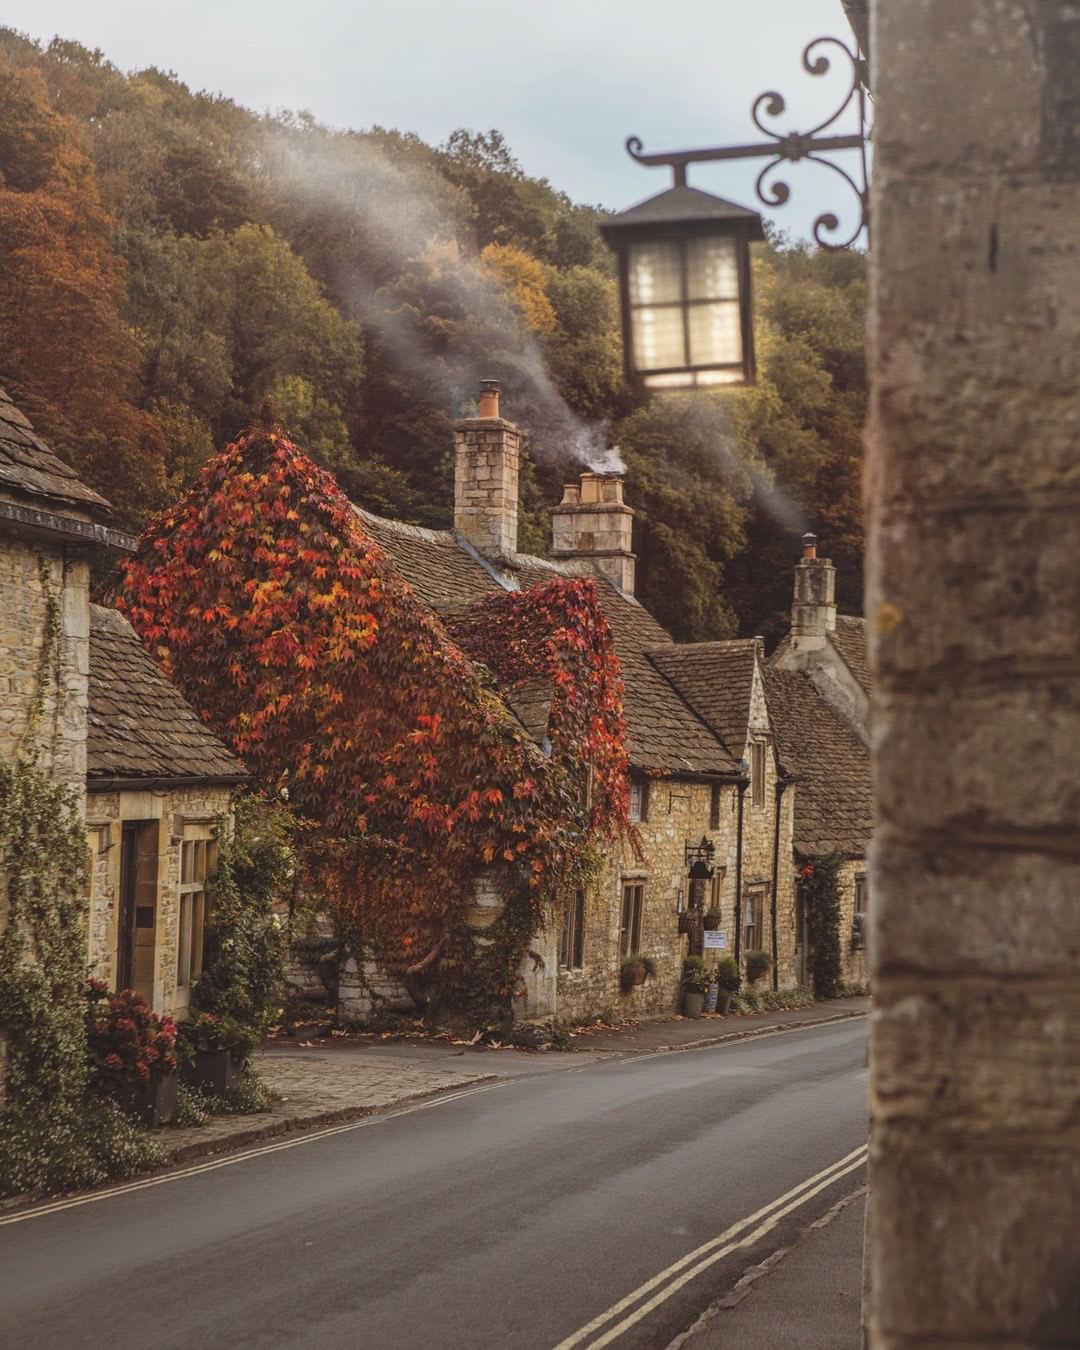 Ivy covered cottage in Castle Combe, a small village at Wiltshire, England.